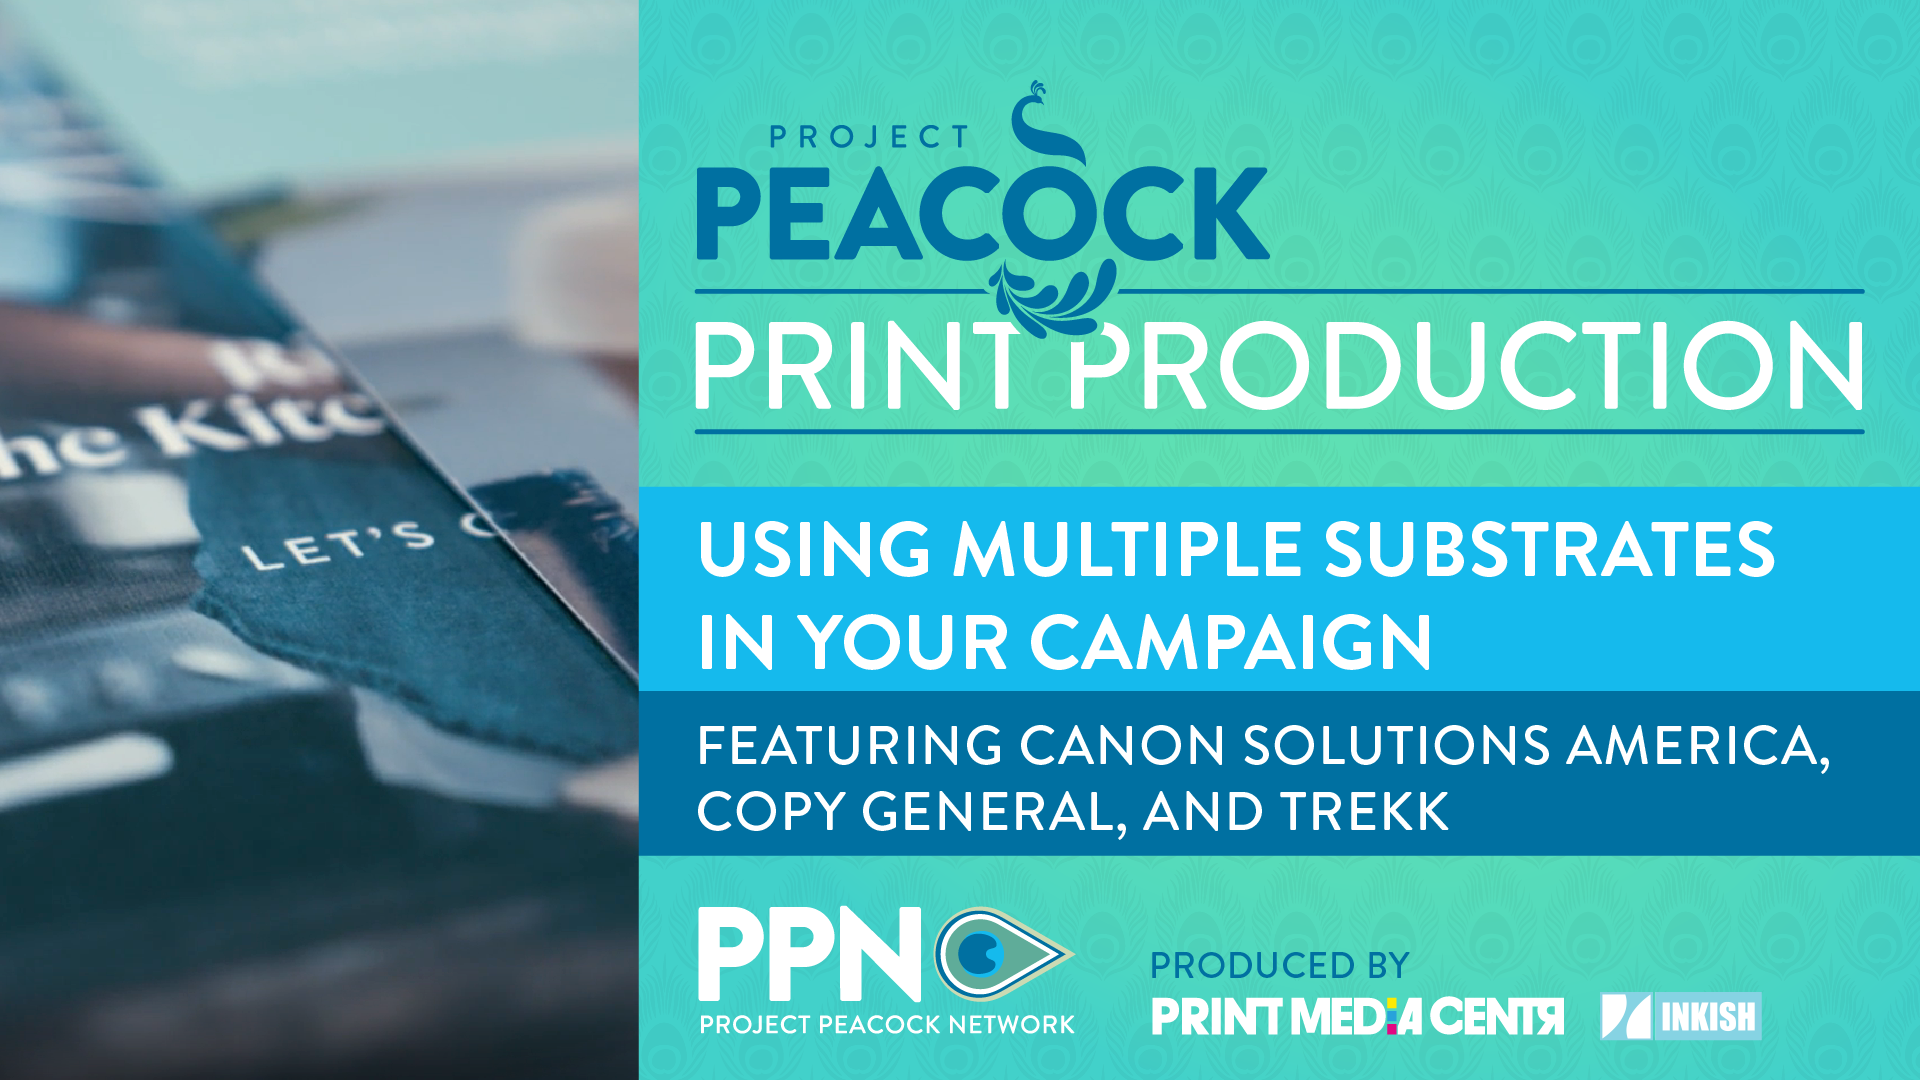 Project Peacock Print Production: Open Kitchen Campaign